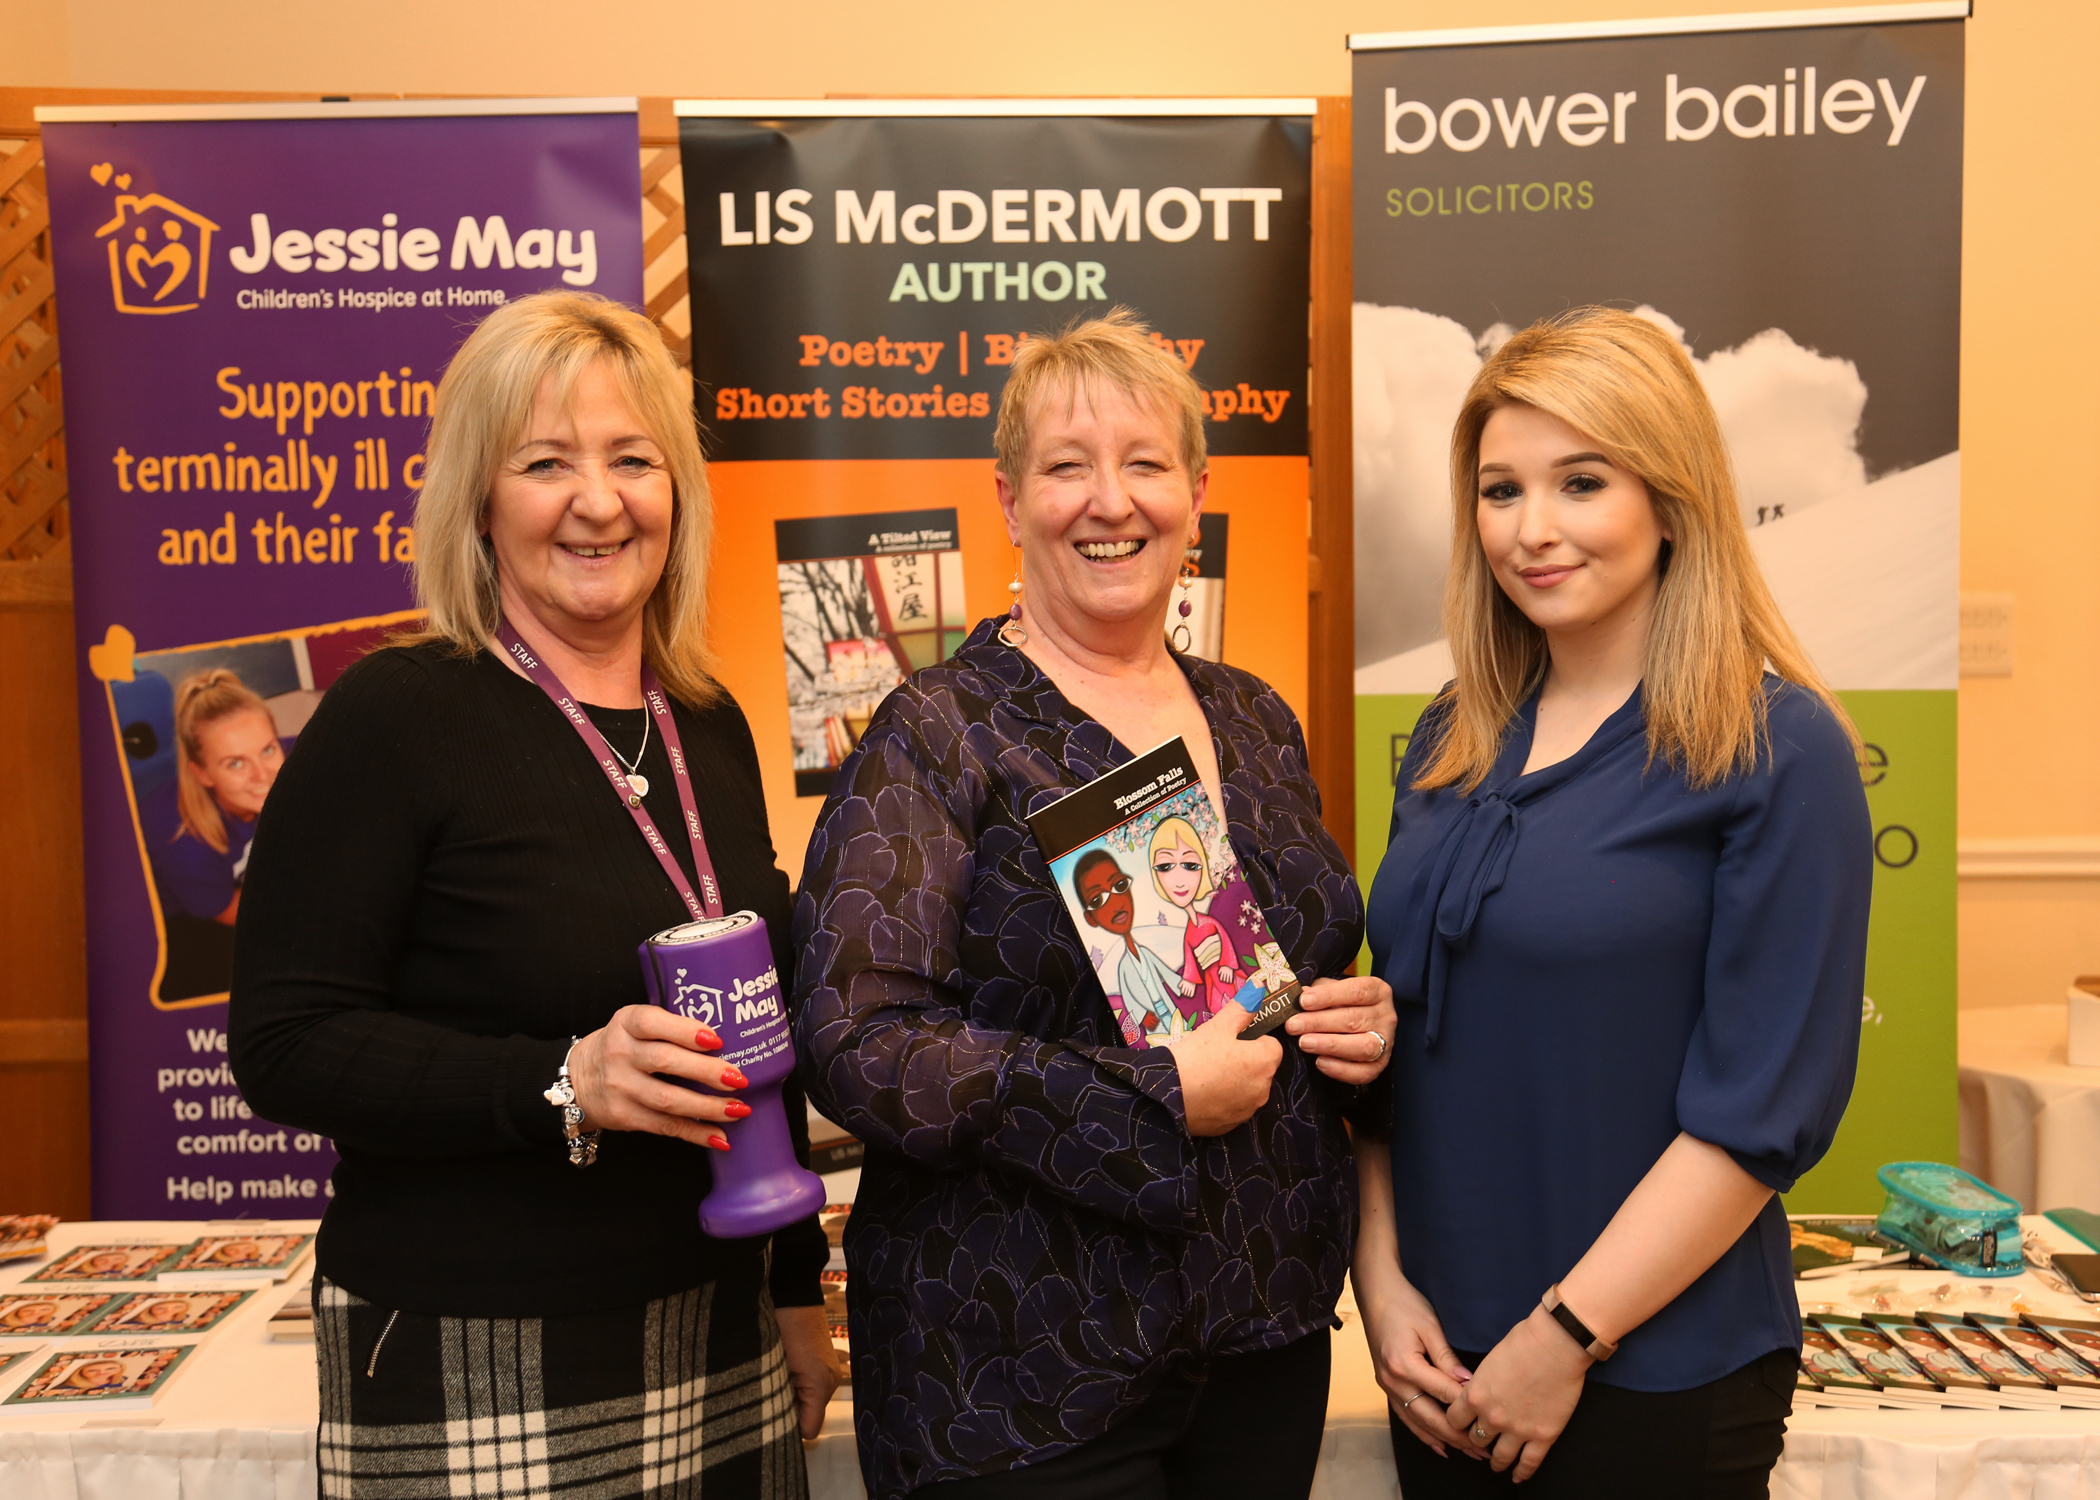 Local author and writing mentor, Lis McDermott launches her latest book in aid of Jessie May